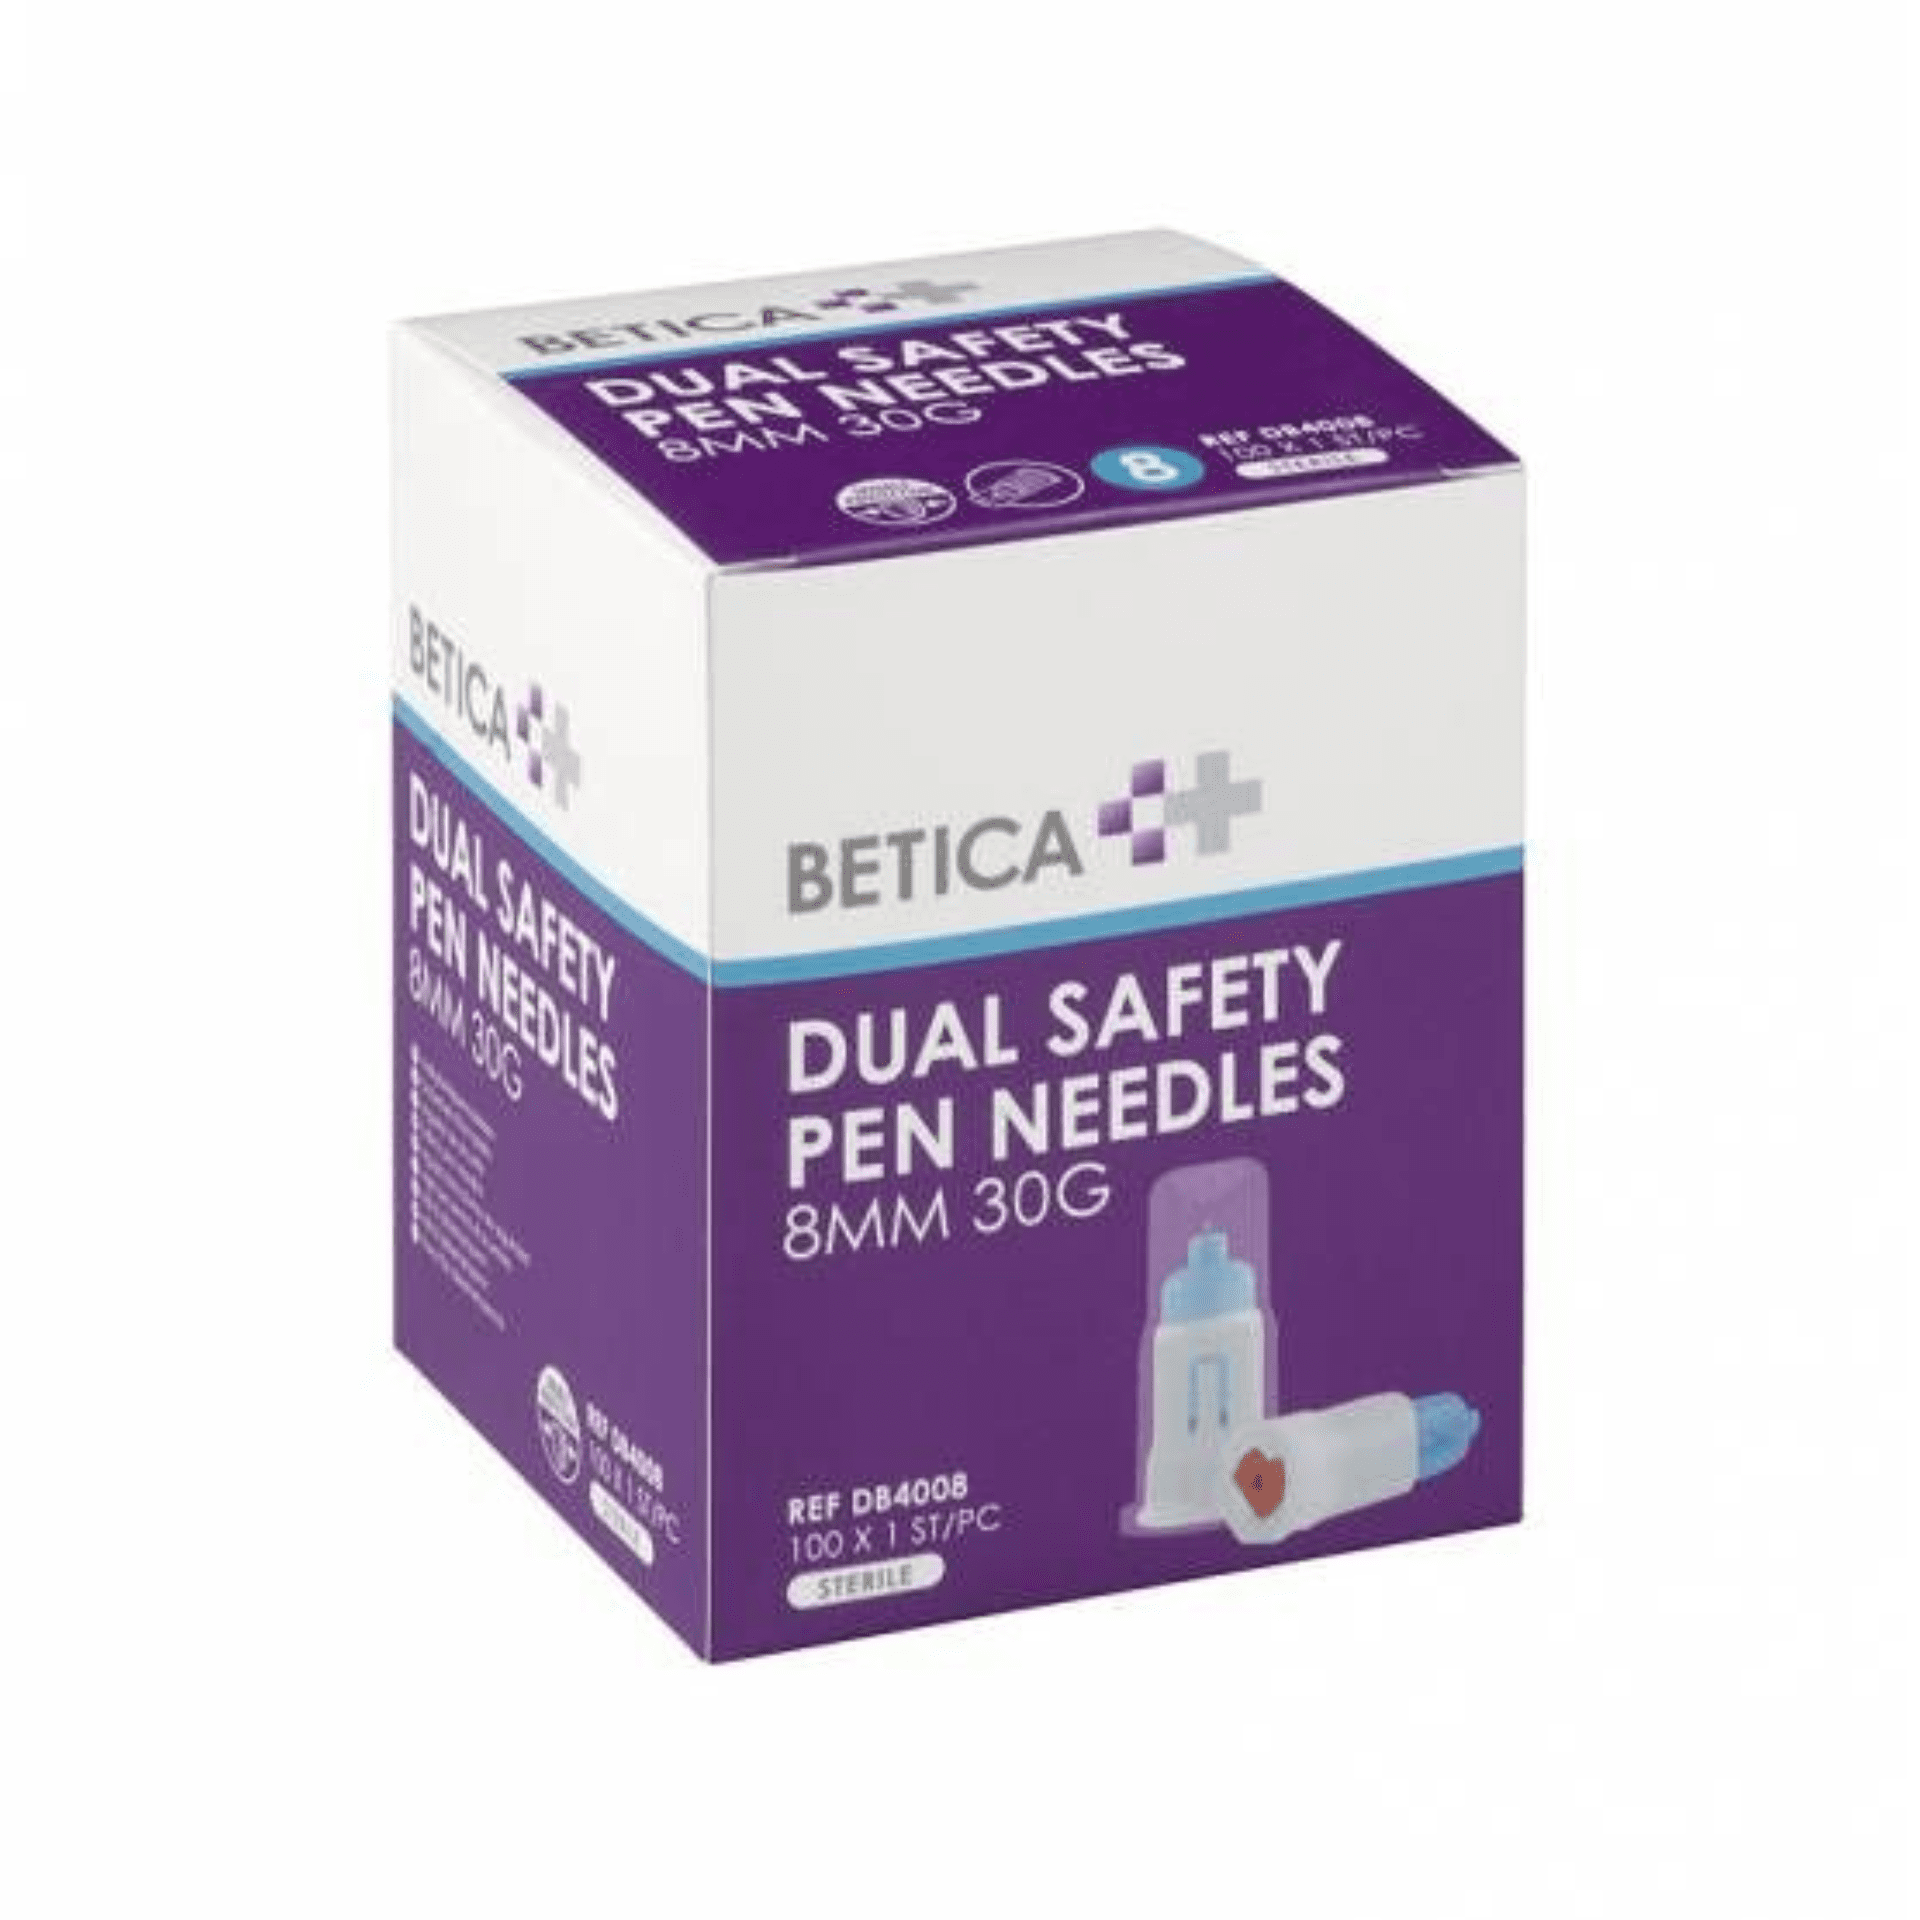 Betica Pen Needles Dual Safety 8 mm 30g 